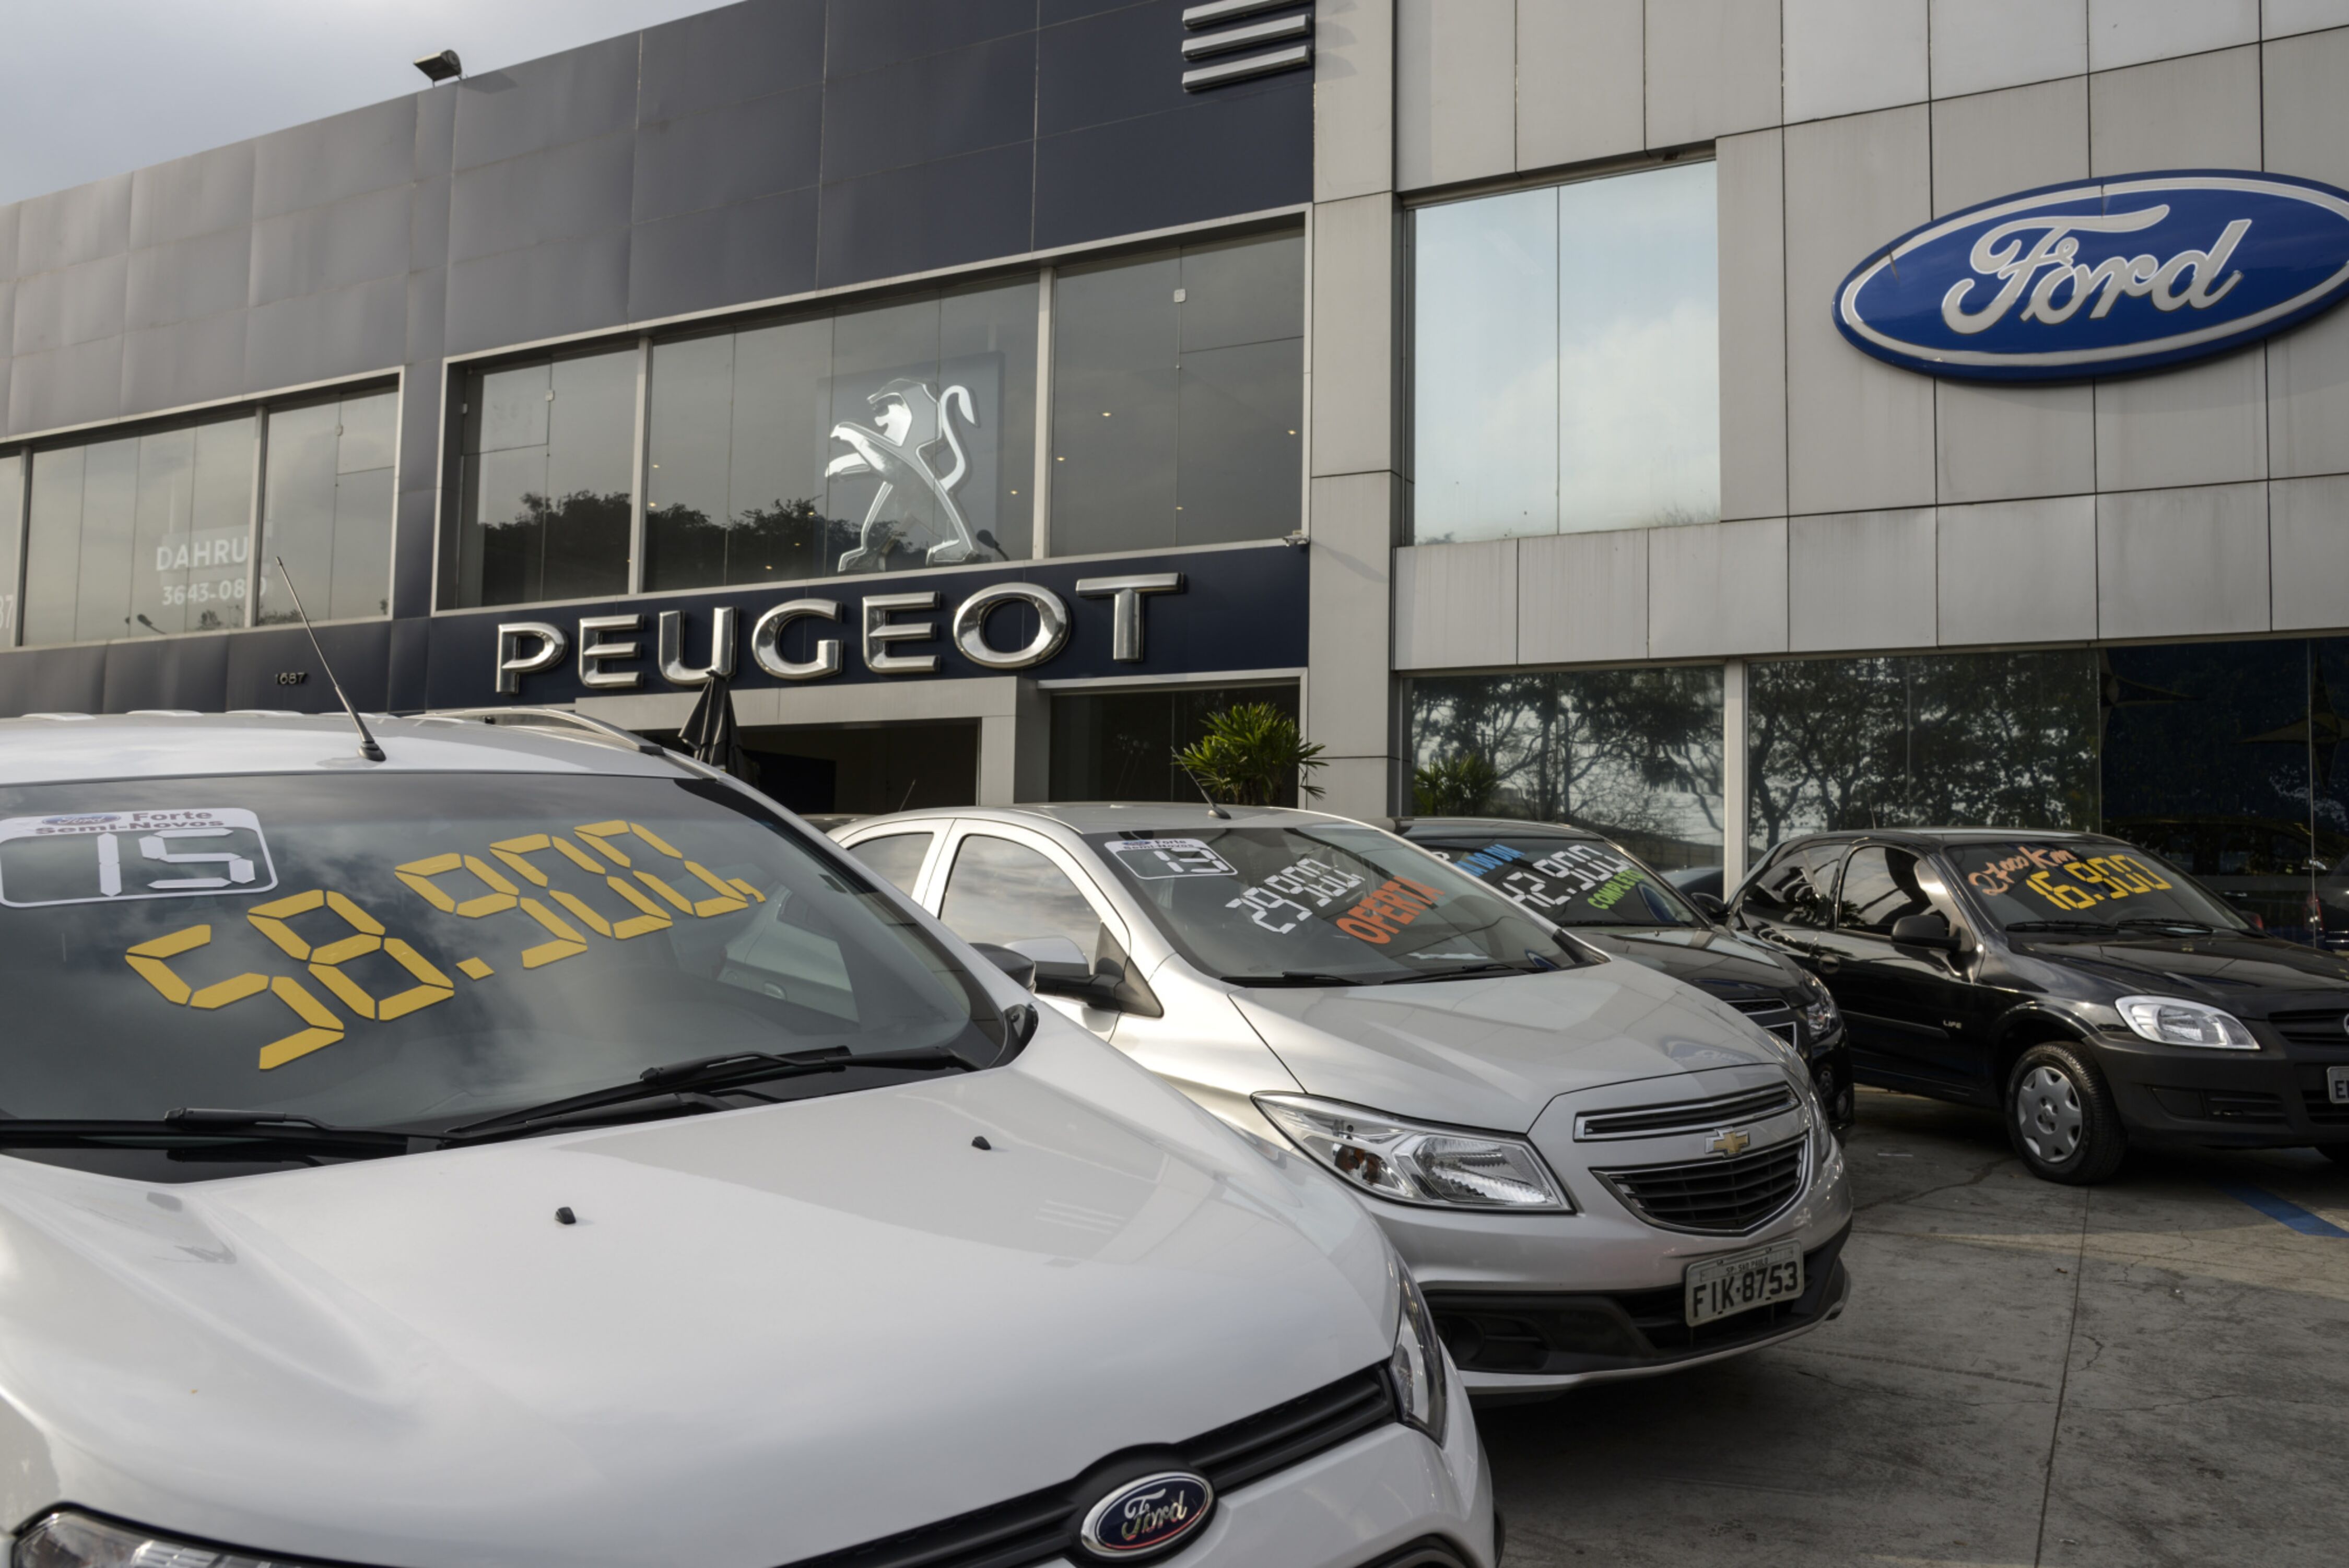 Ford announces that it will no longer make vehicles in Brazil